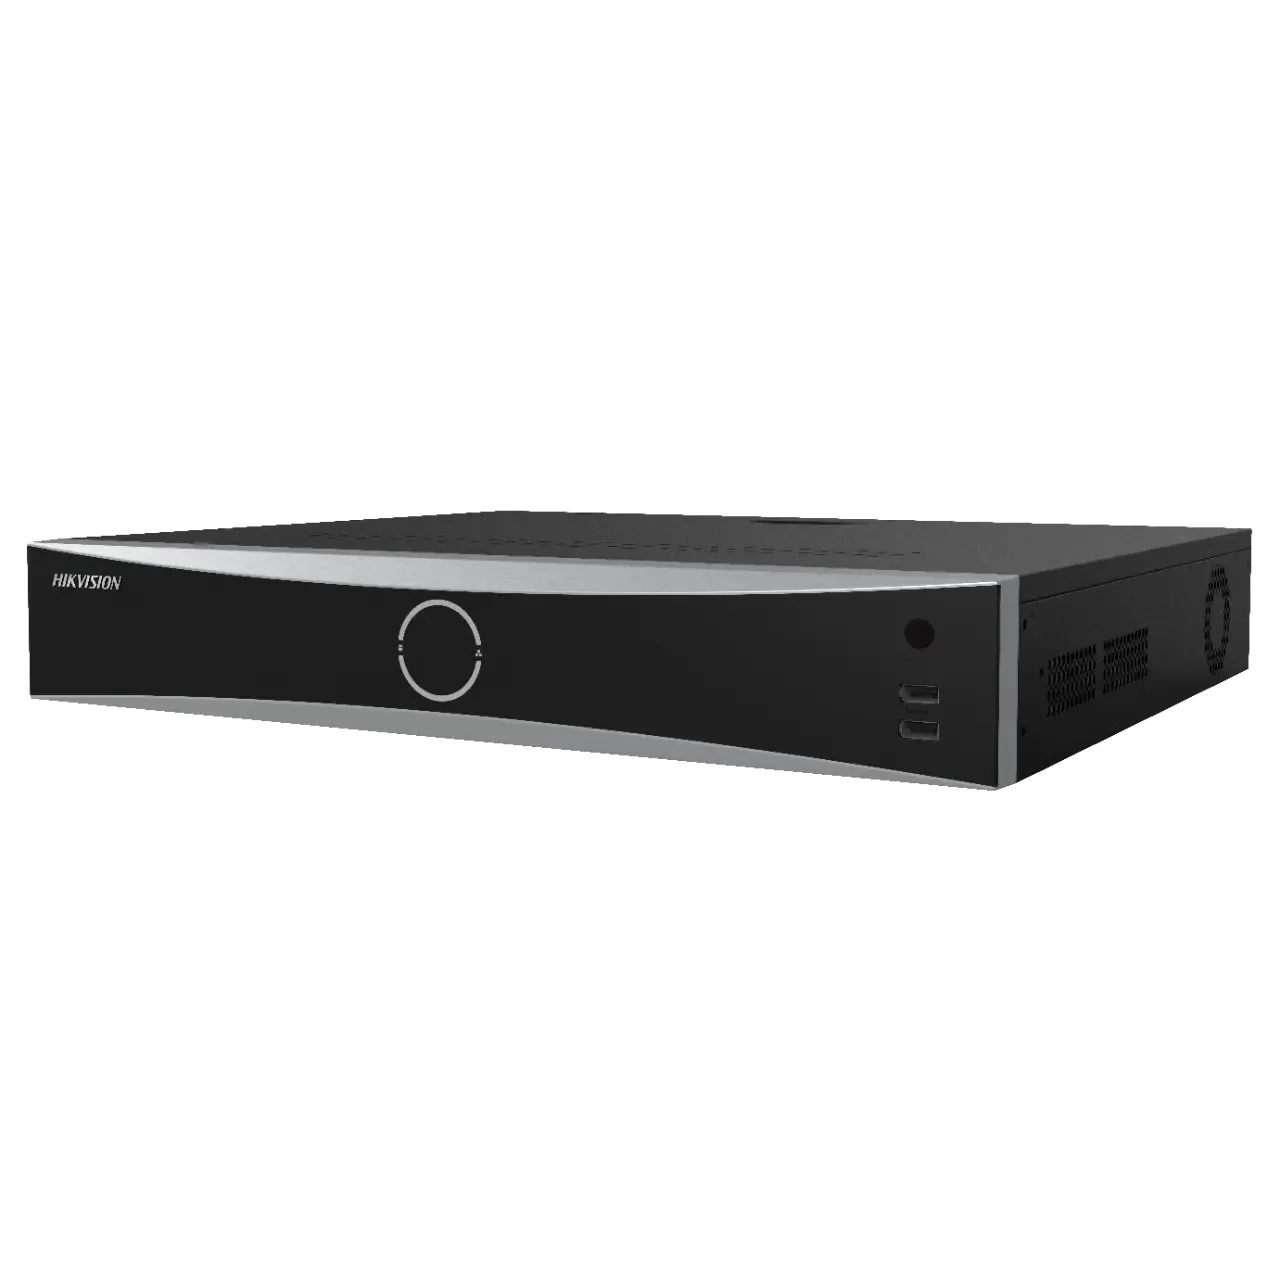 Nvr hikvision ds-7732nxi-k4/16p 32 canale